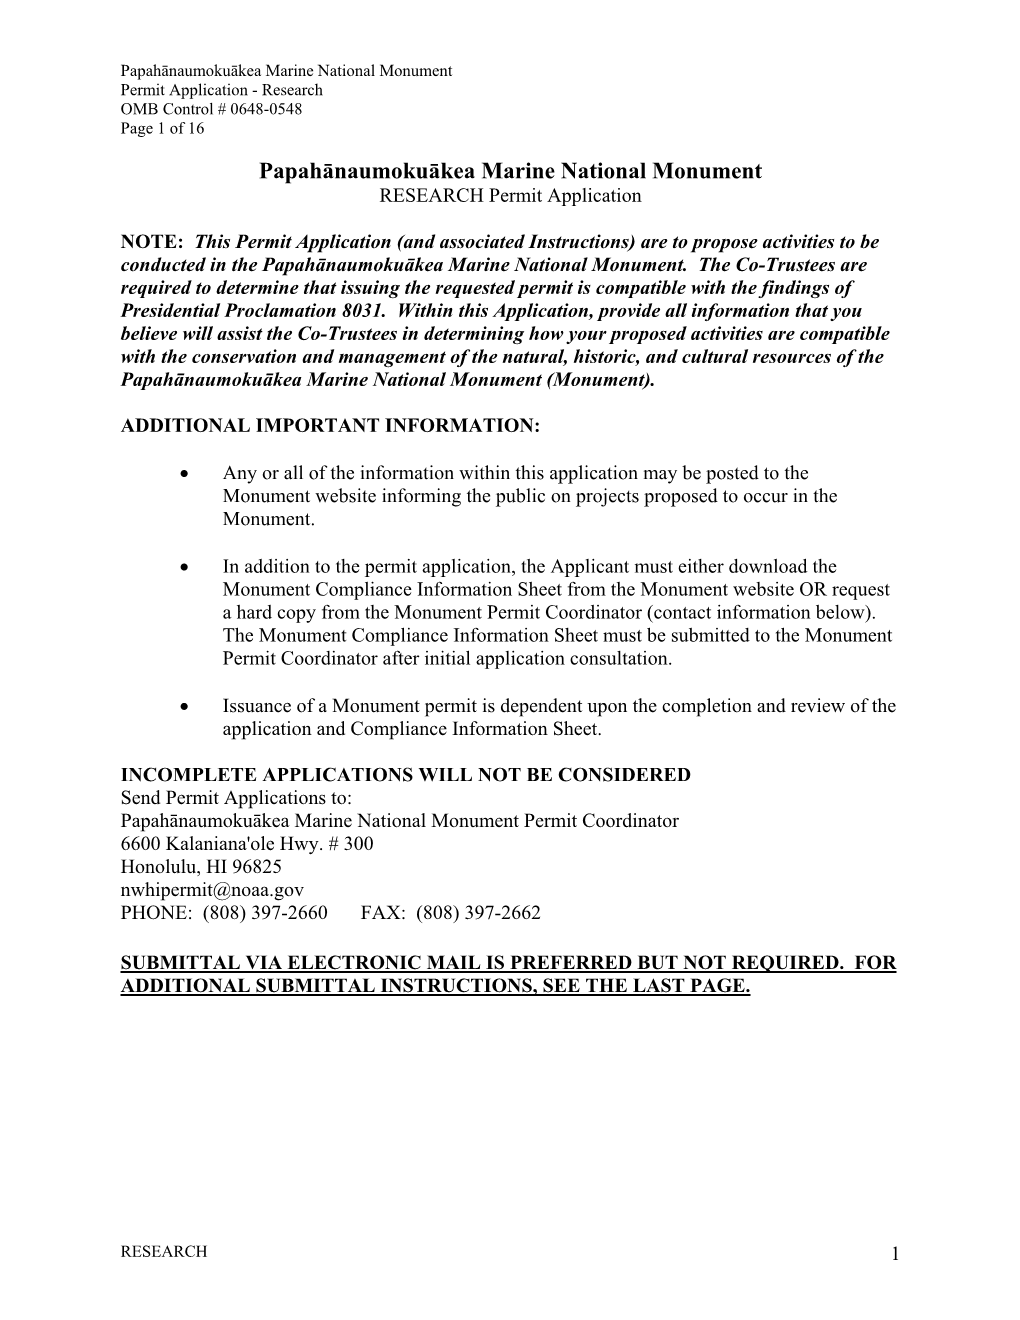 Application - Research OMB Control # 0648-0548 Page 1 of 16